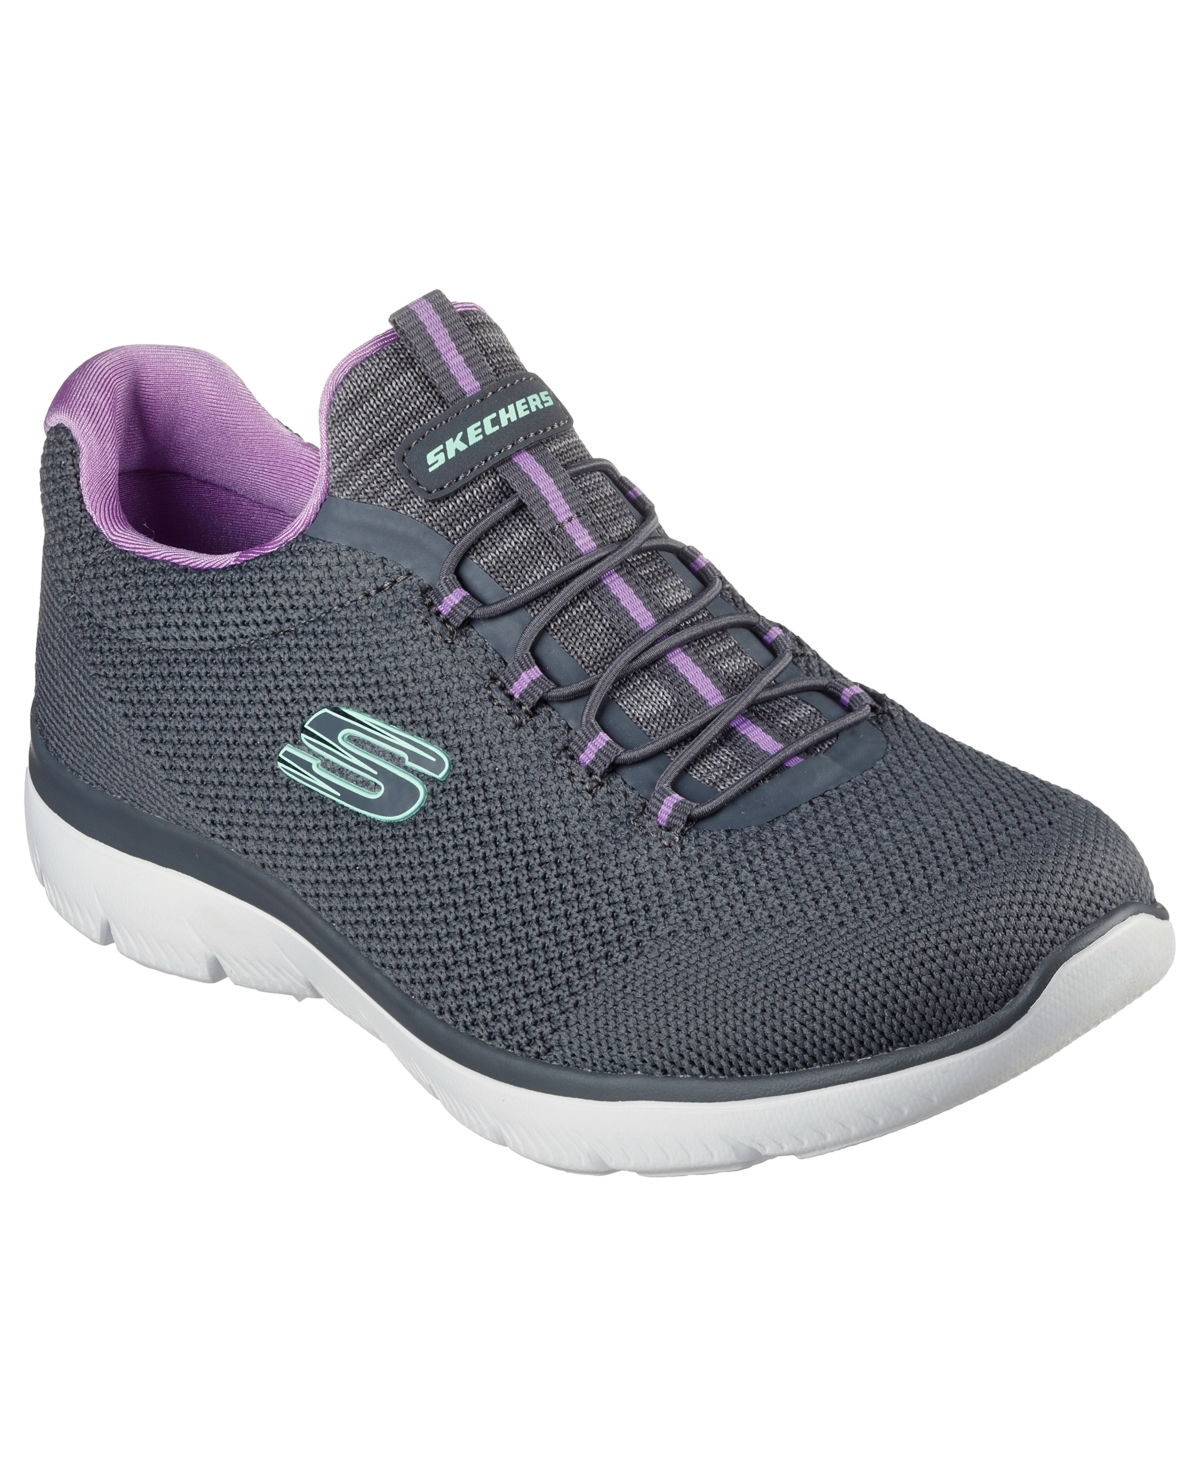 Women's Summits - Cool Classic Wide Width Athletic Walking Sneakers from Finish Line - Charcoal, Lavendar